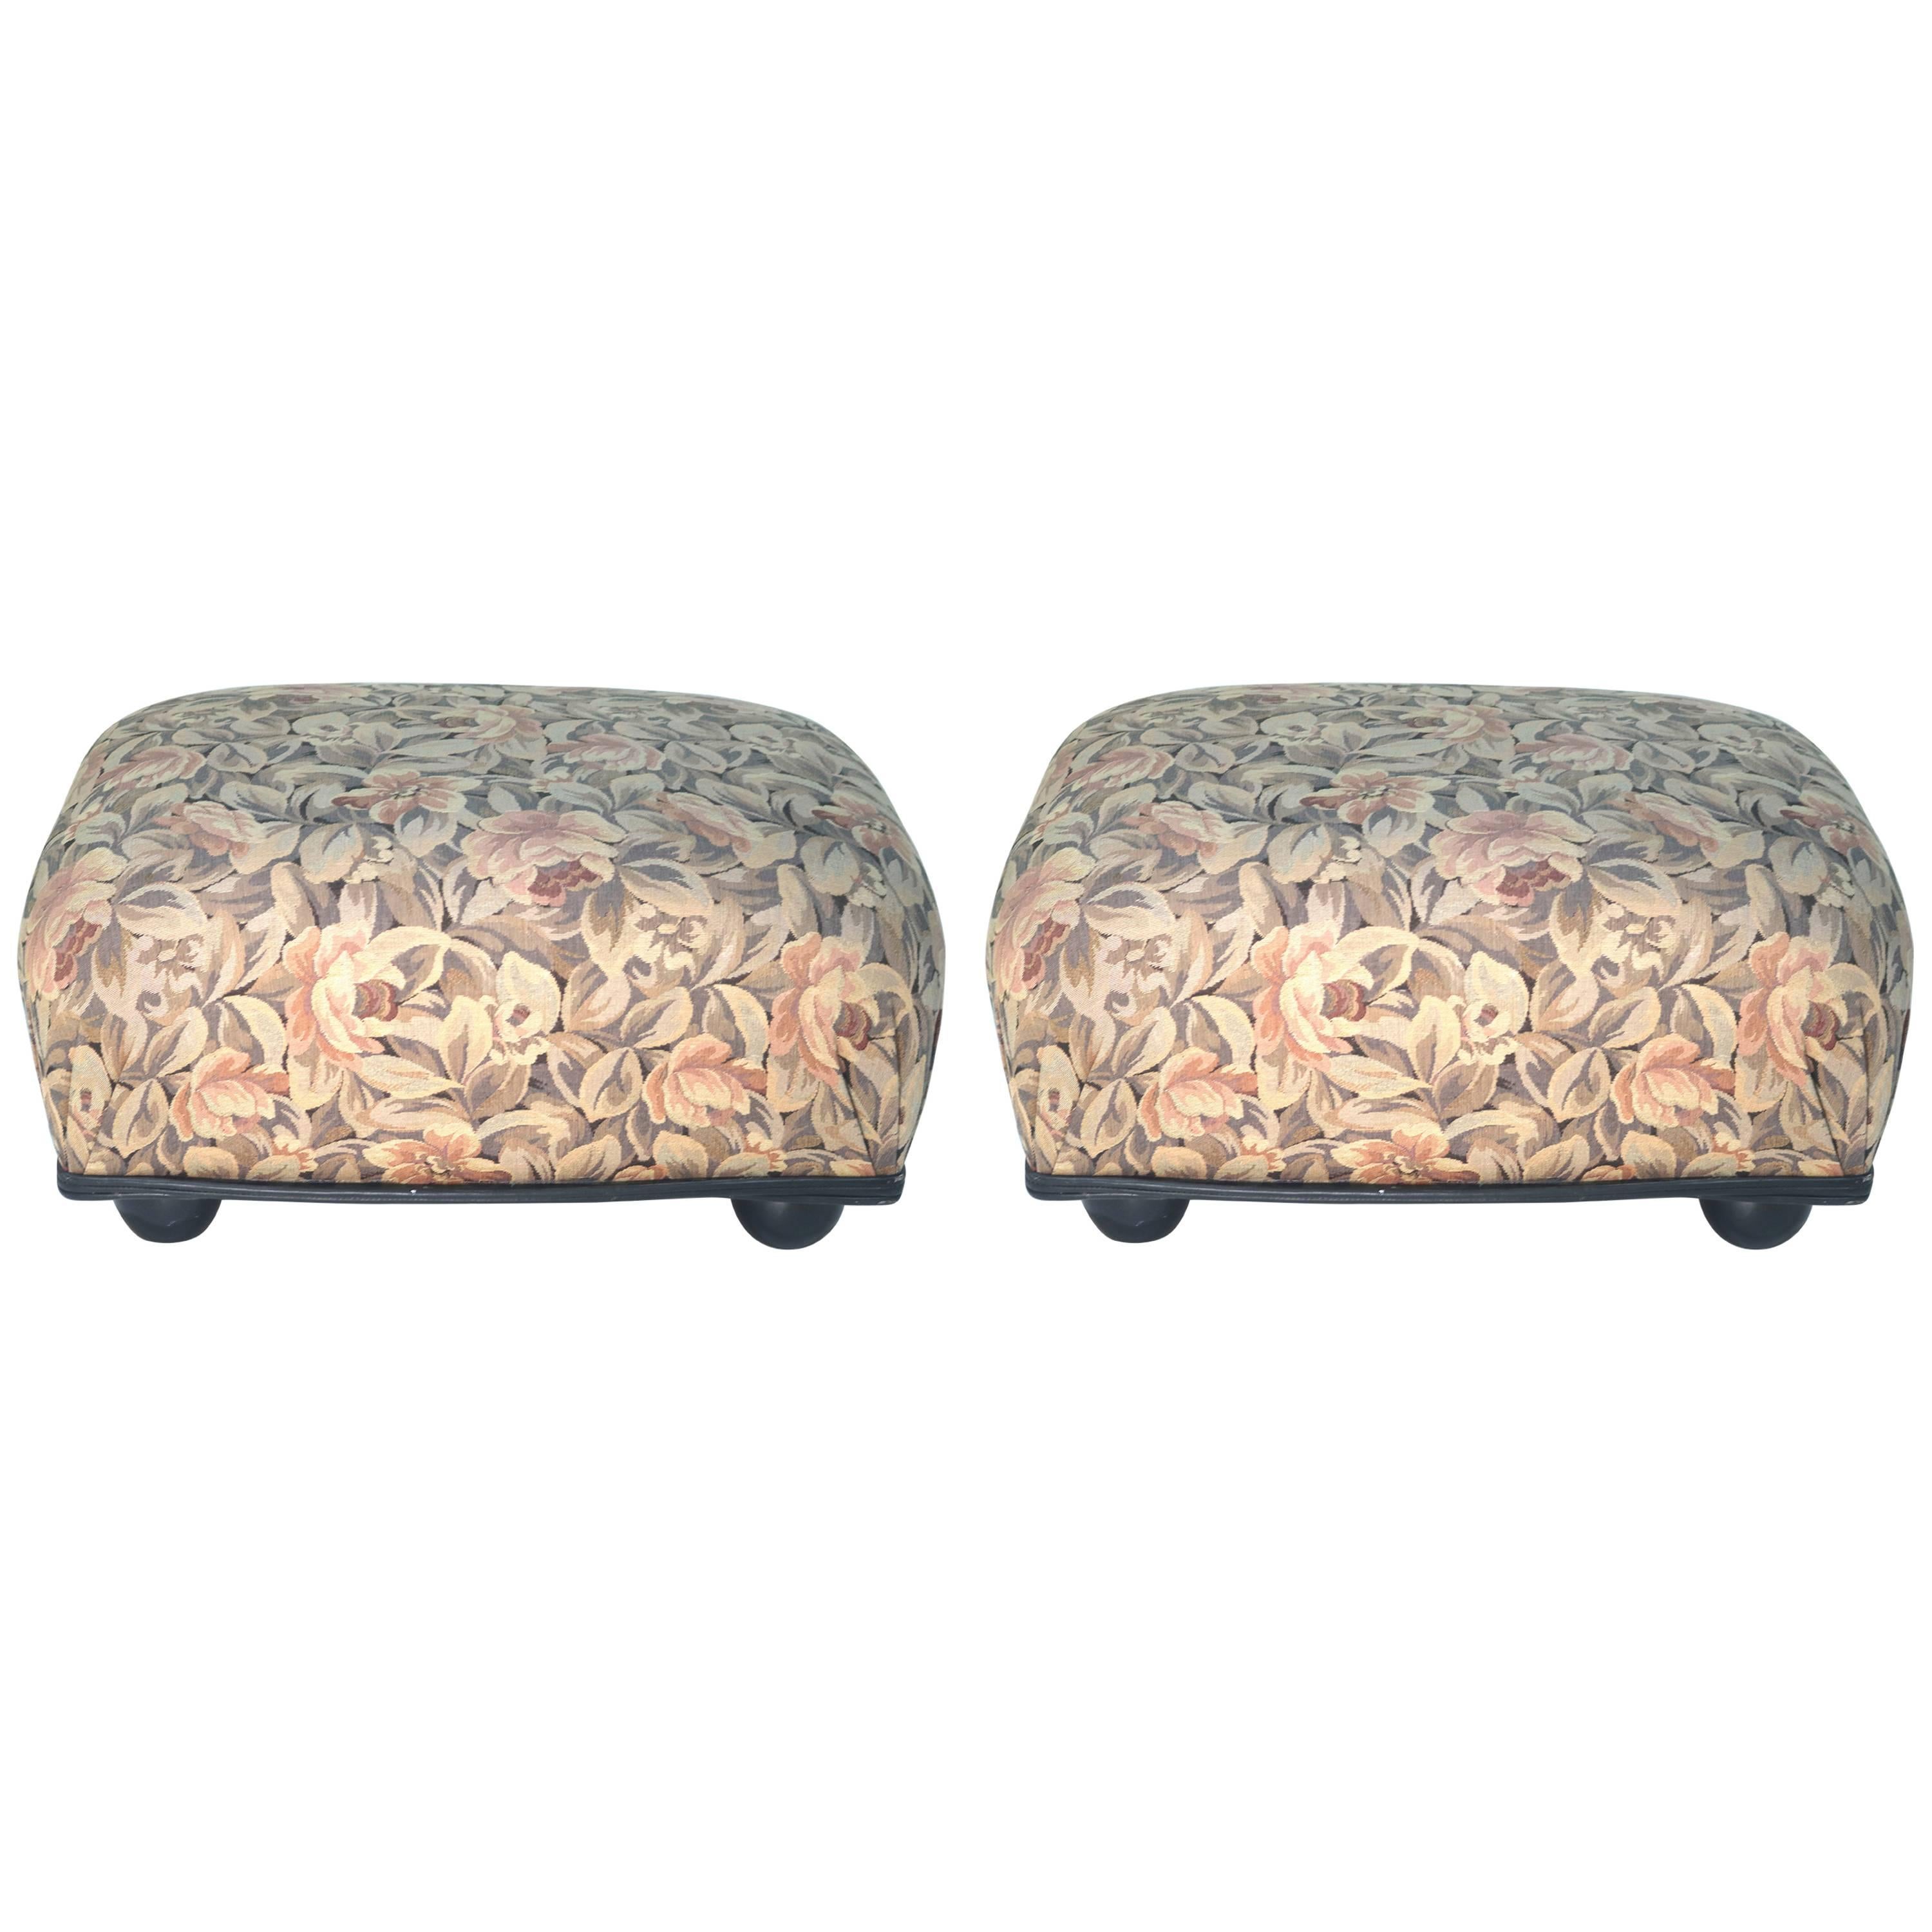 Ronn Jaffe Tapestry Woven Linen Pair Ottoman Foot Stools-Leather Welting For Sale